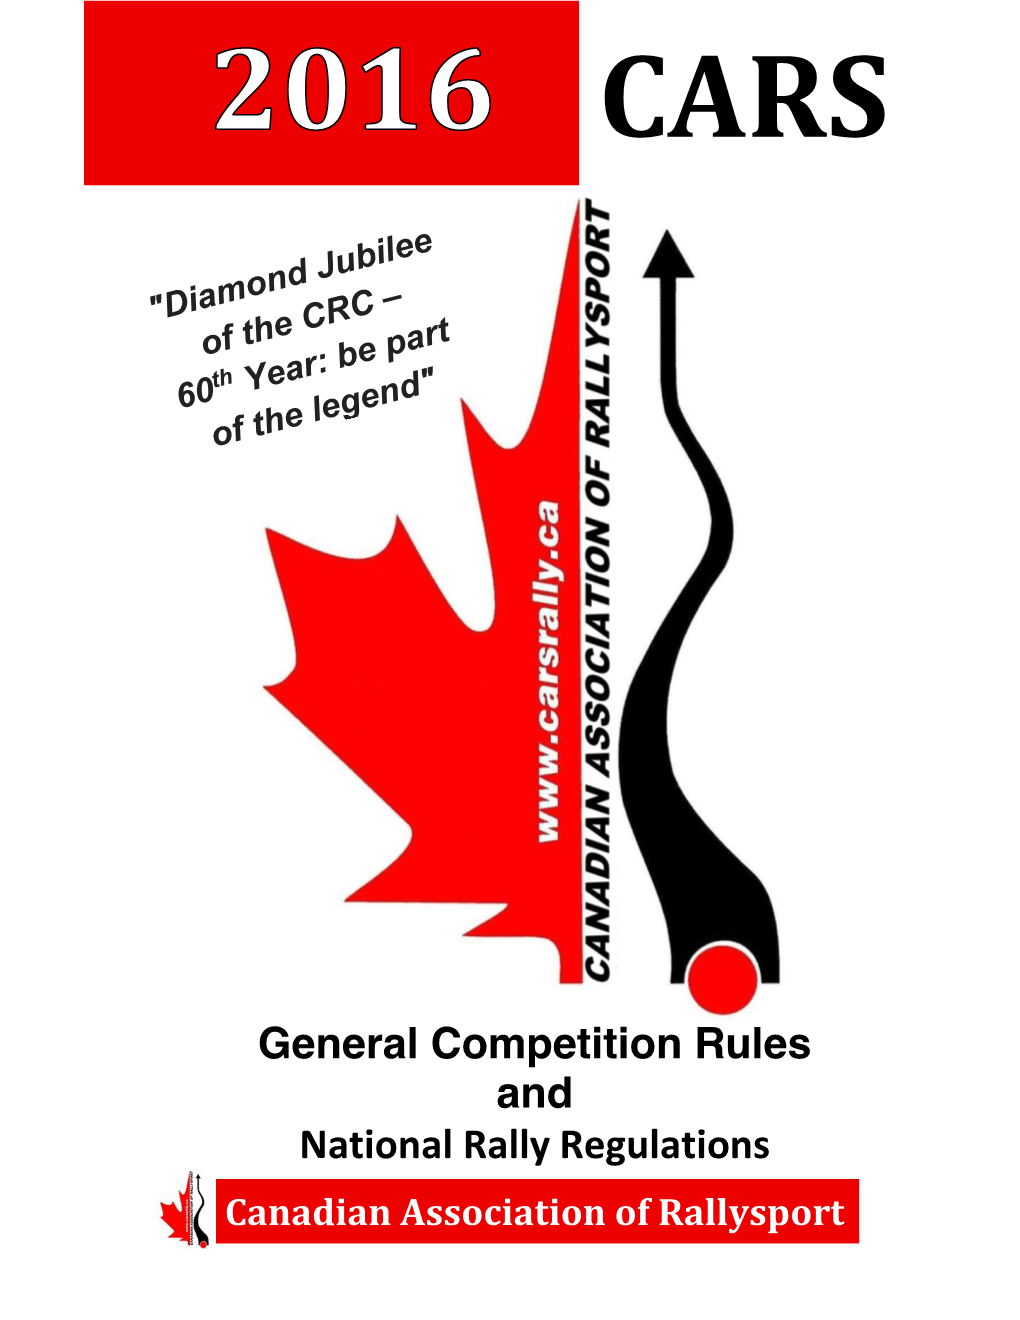 General Competition Rules and National Rally Regulations